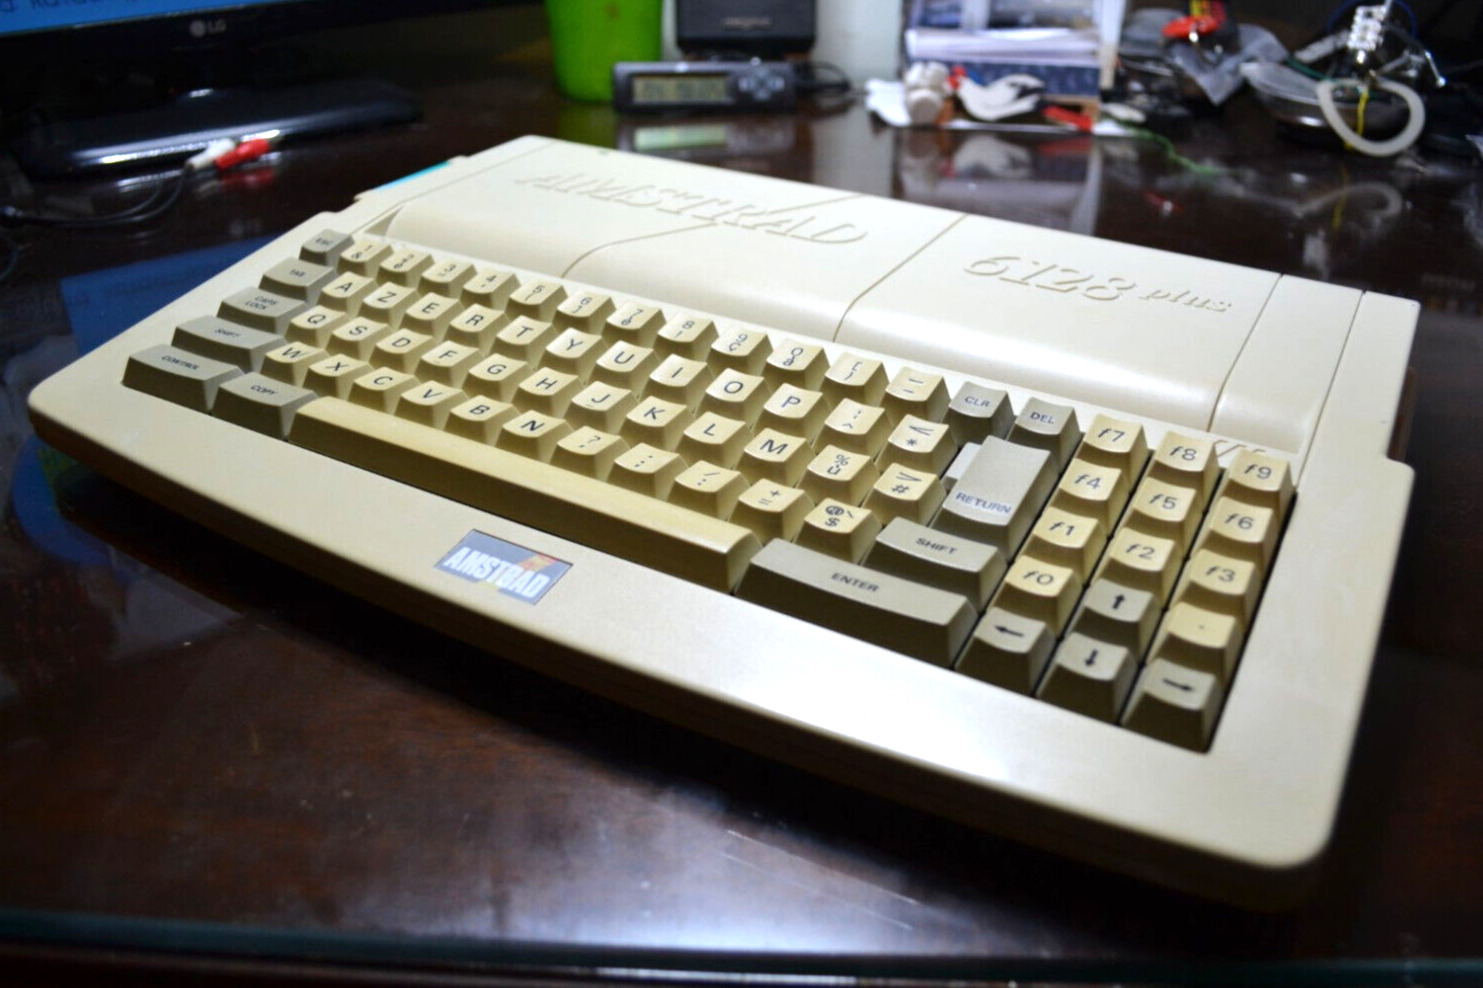 Amstrad cpc 6128 plus. French keyboard and basic